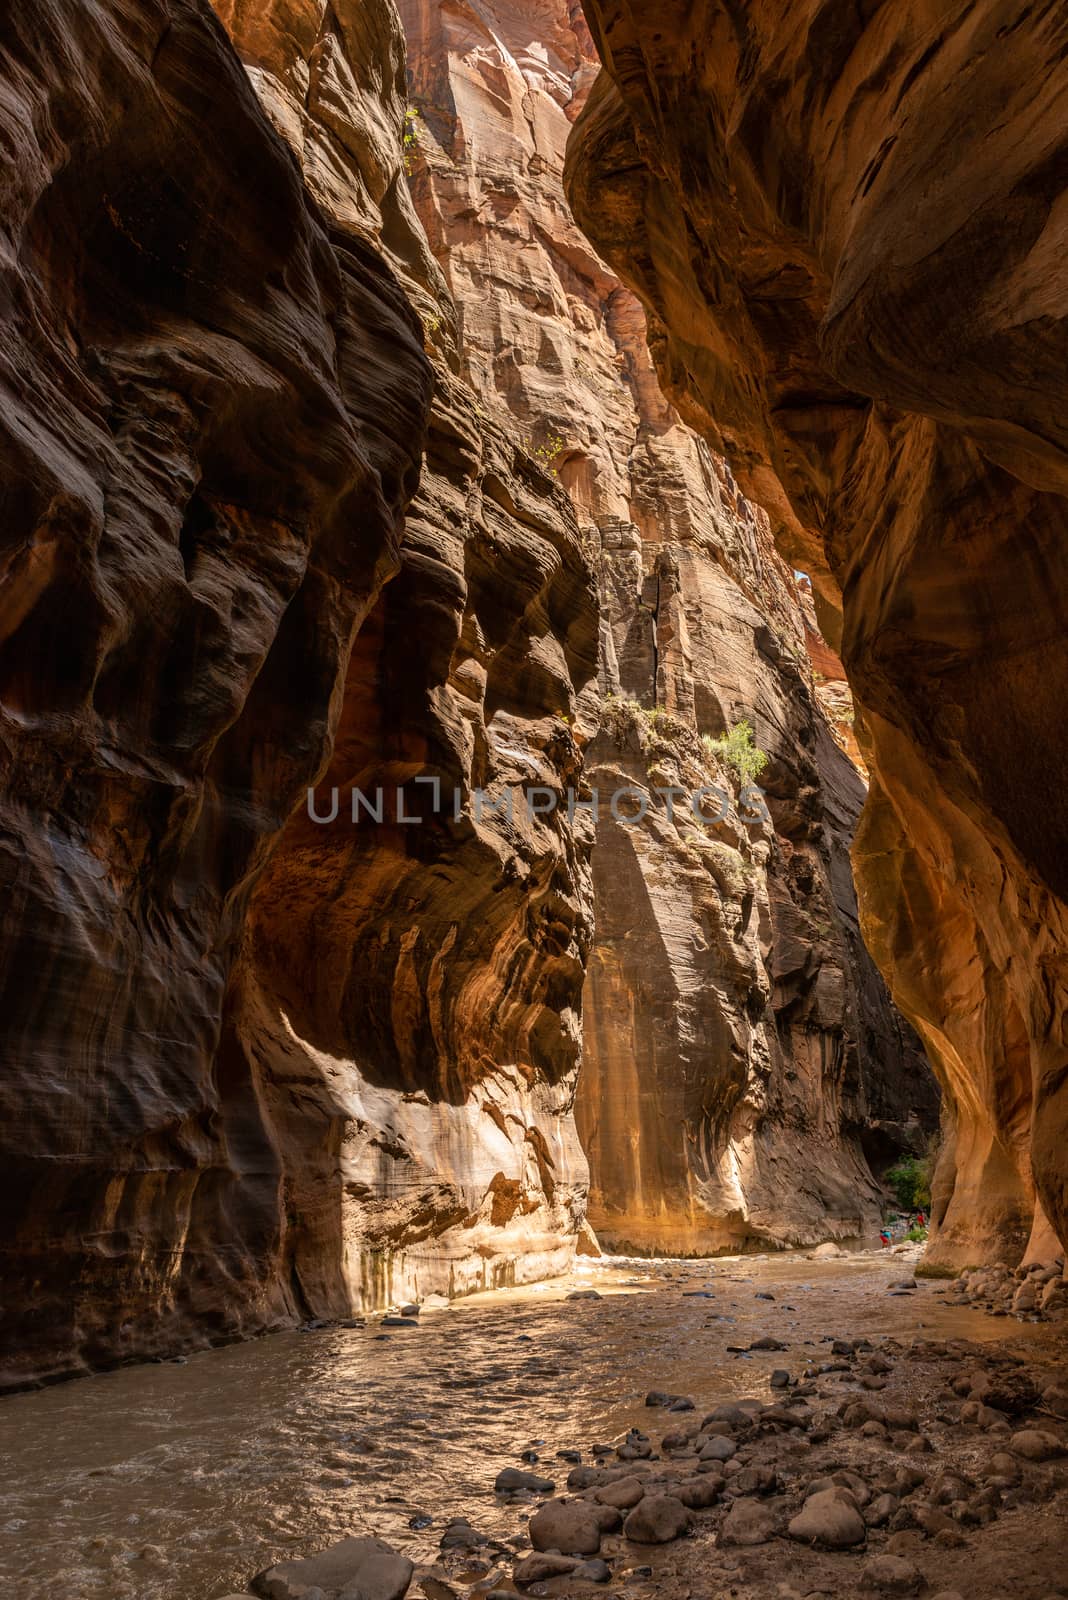 The Narrows in Zion National Park, Utah by Njean